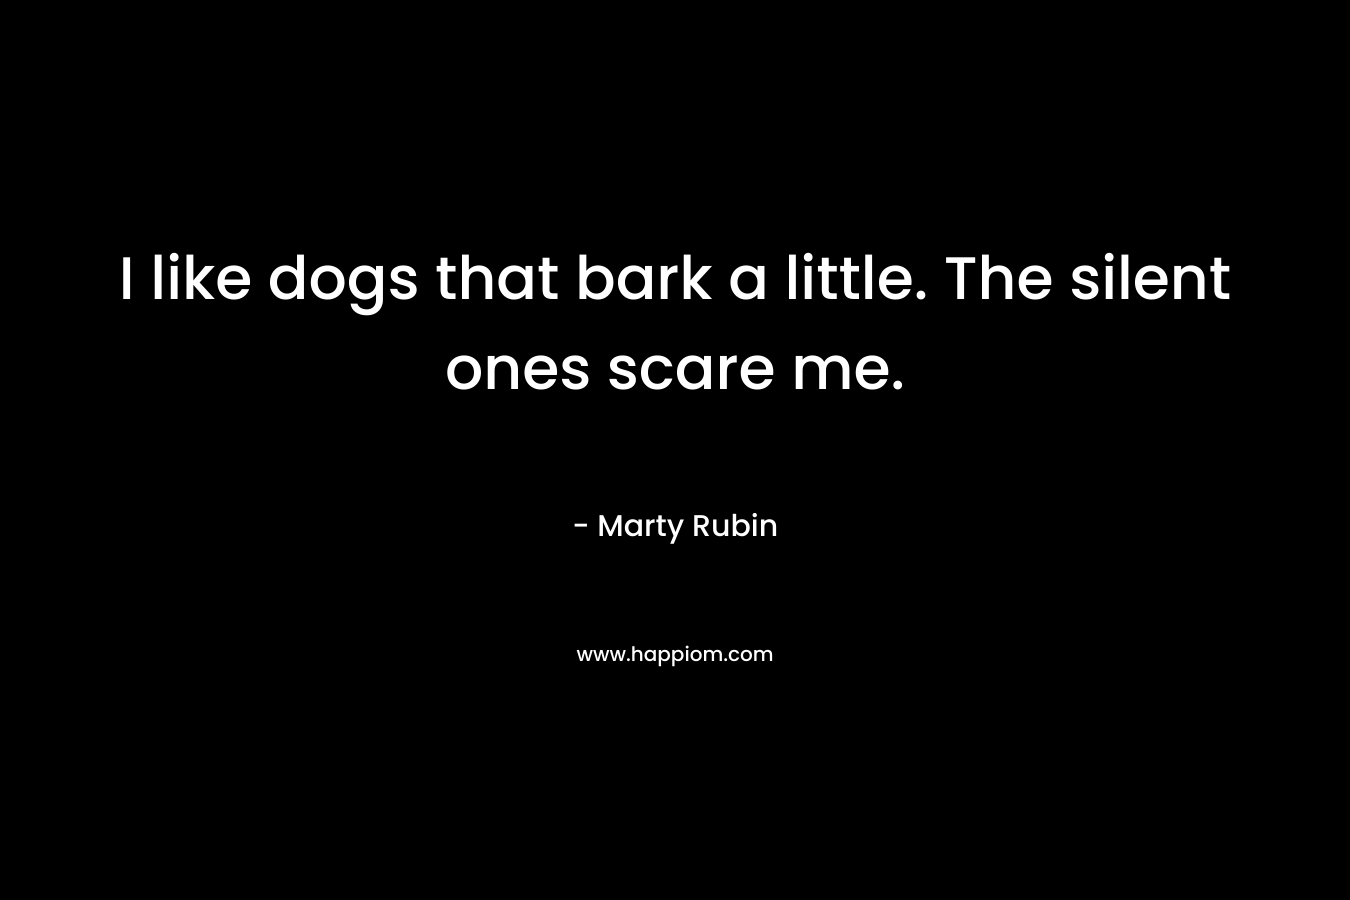 I like dogs that bark a little. The silent ones scare me. – Marty Rubin